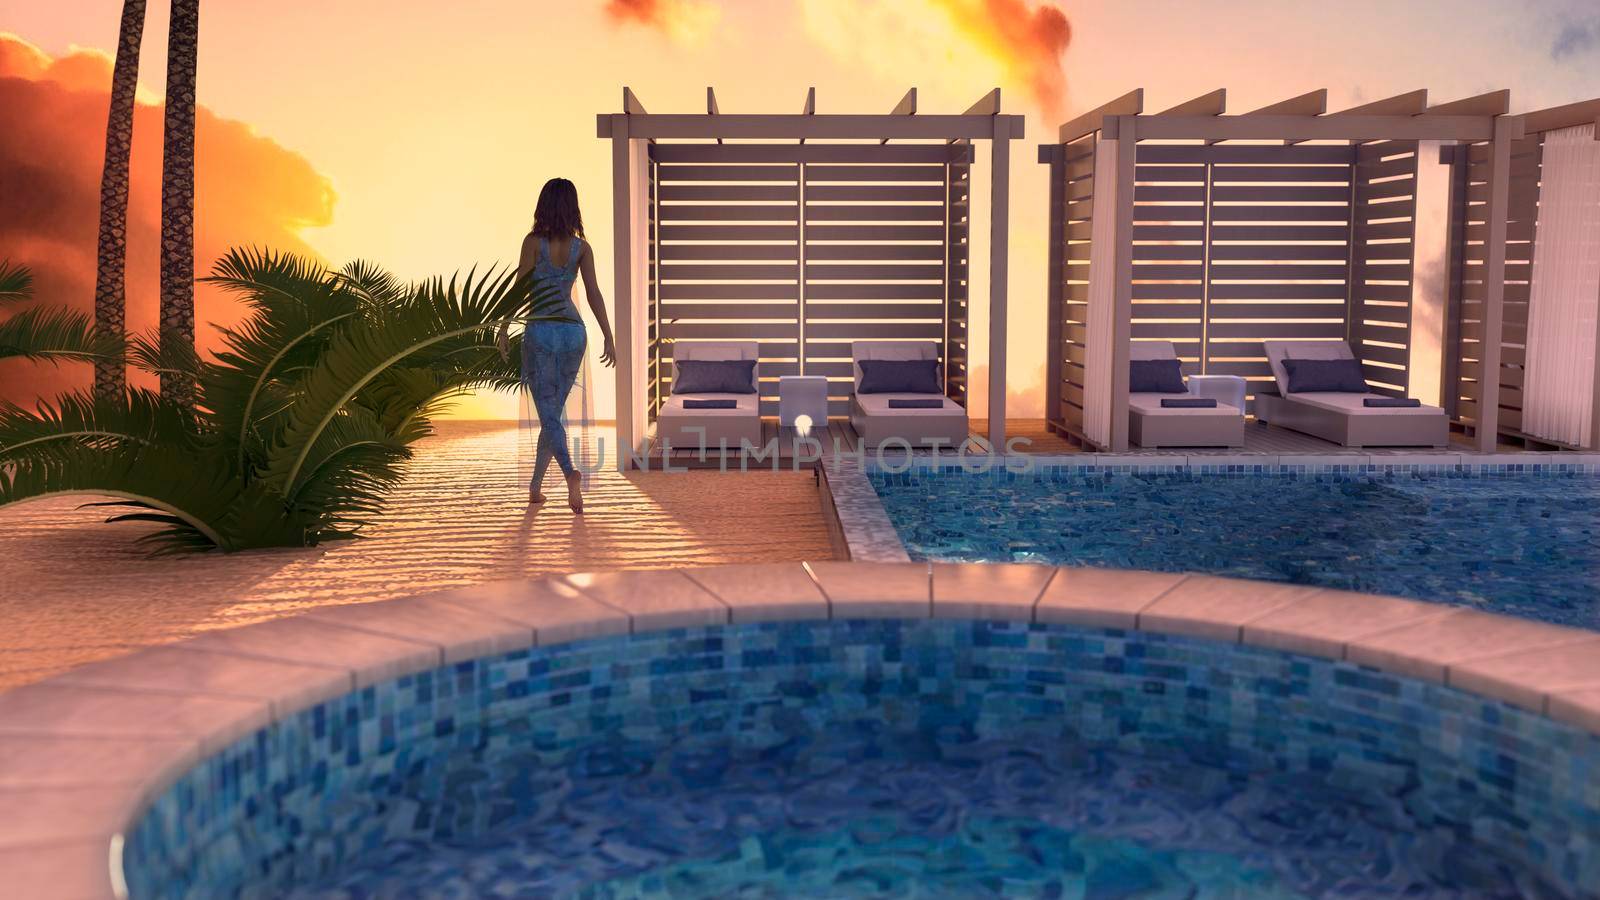 Young girl admiring the sunset near the hotel swimming pool at the beach by ankarb